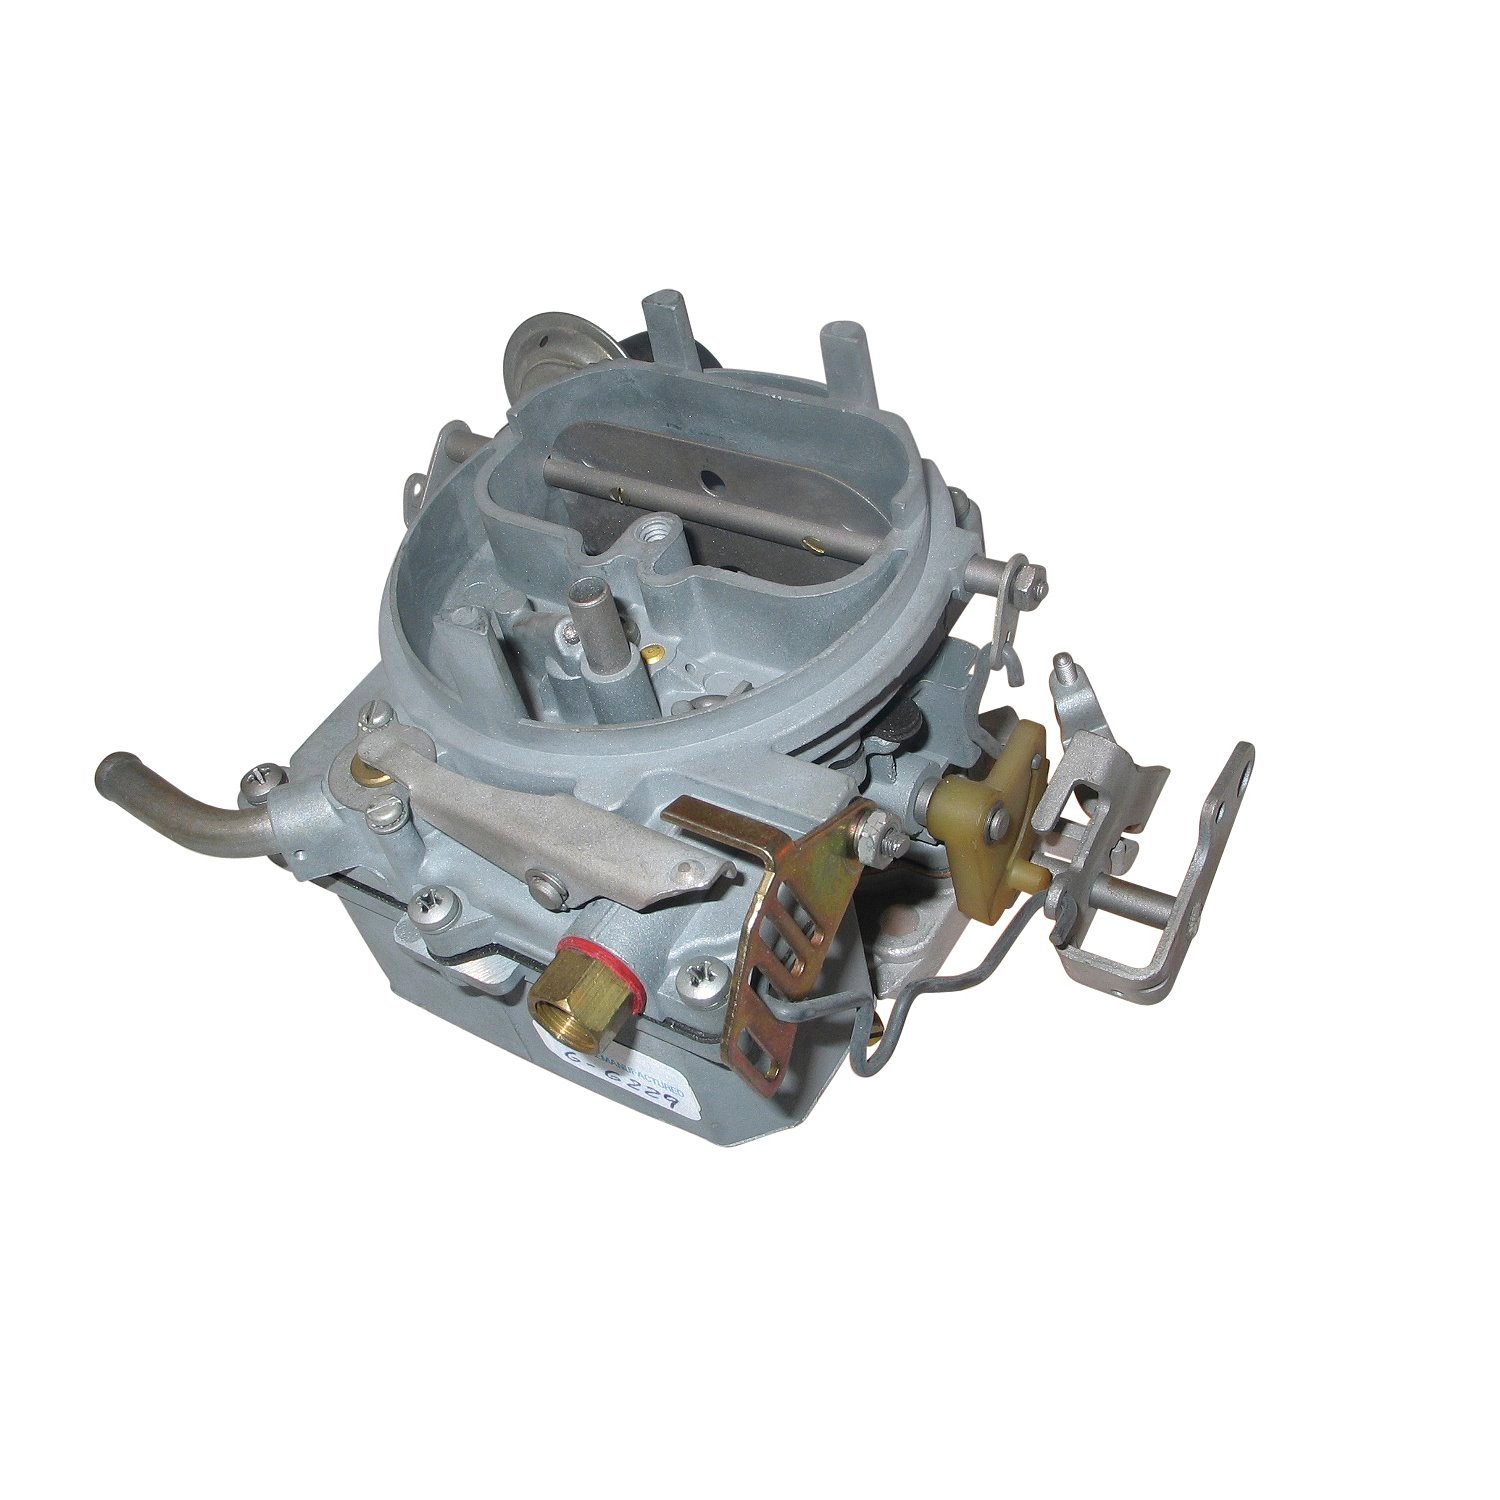 6-6226 Holley Remanufactured Carburetor, 2210, Heavy Duty-Style